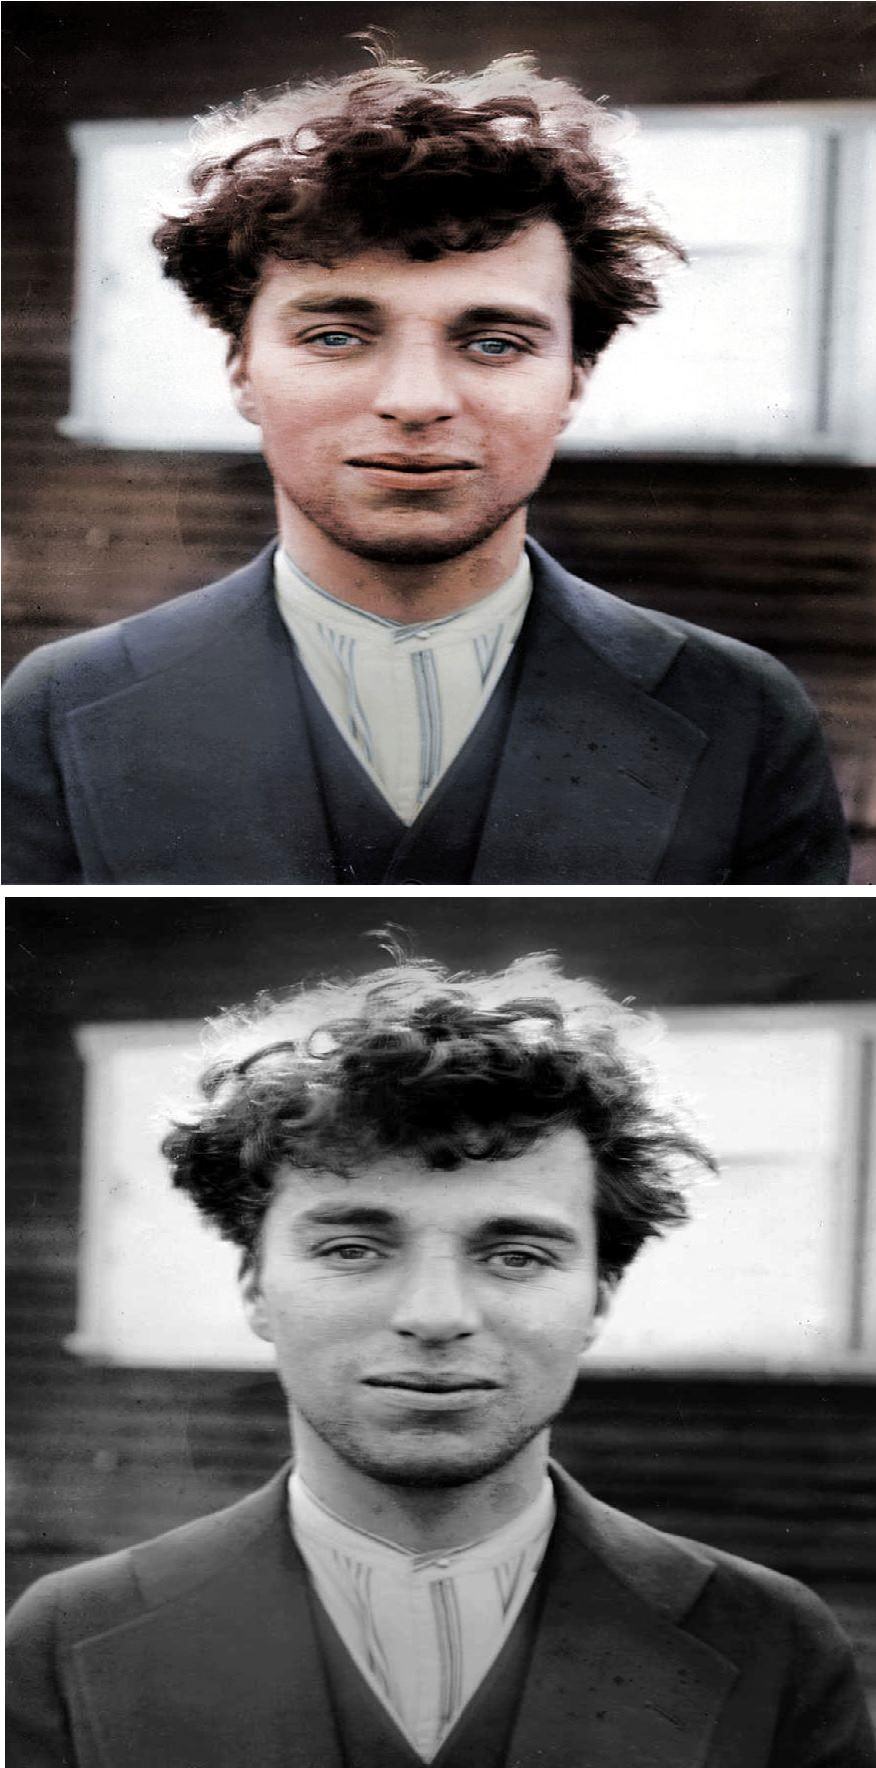 Charlie Chaplin at the Age of 27, 1916